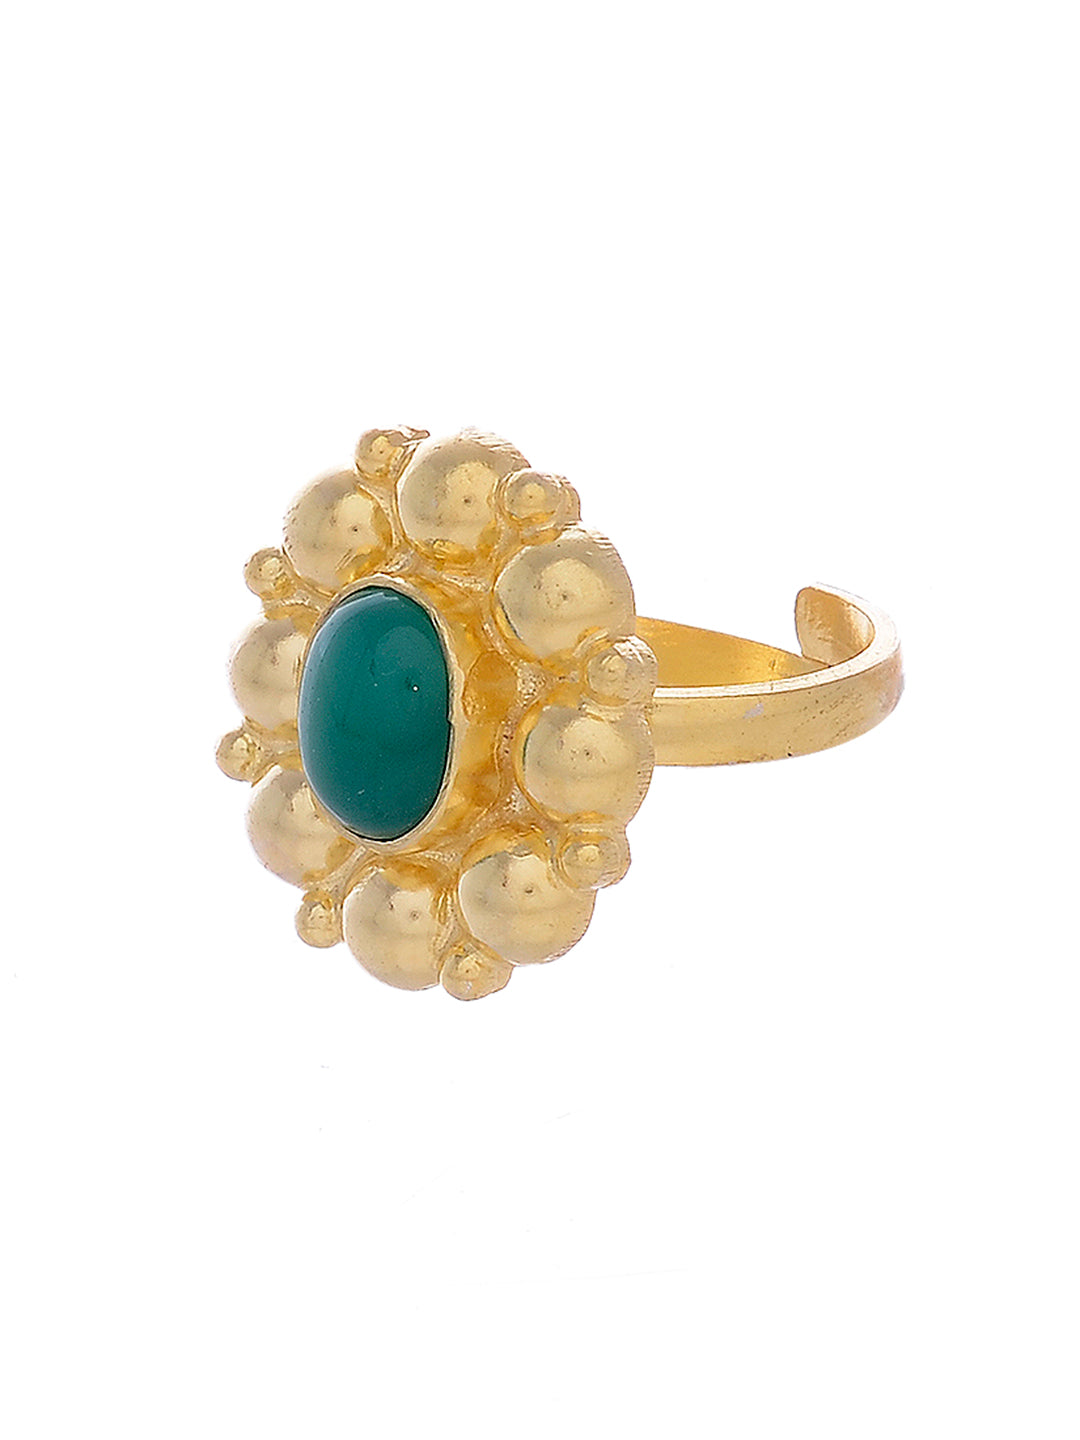 Green Onyx 925 Sterling Silver Gold Plated Adjustable Ring